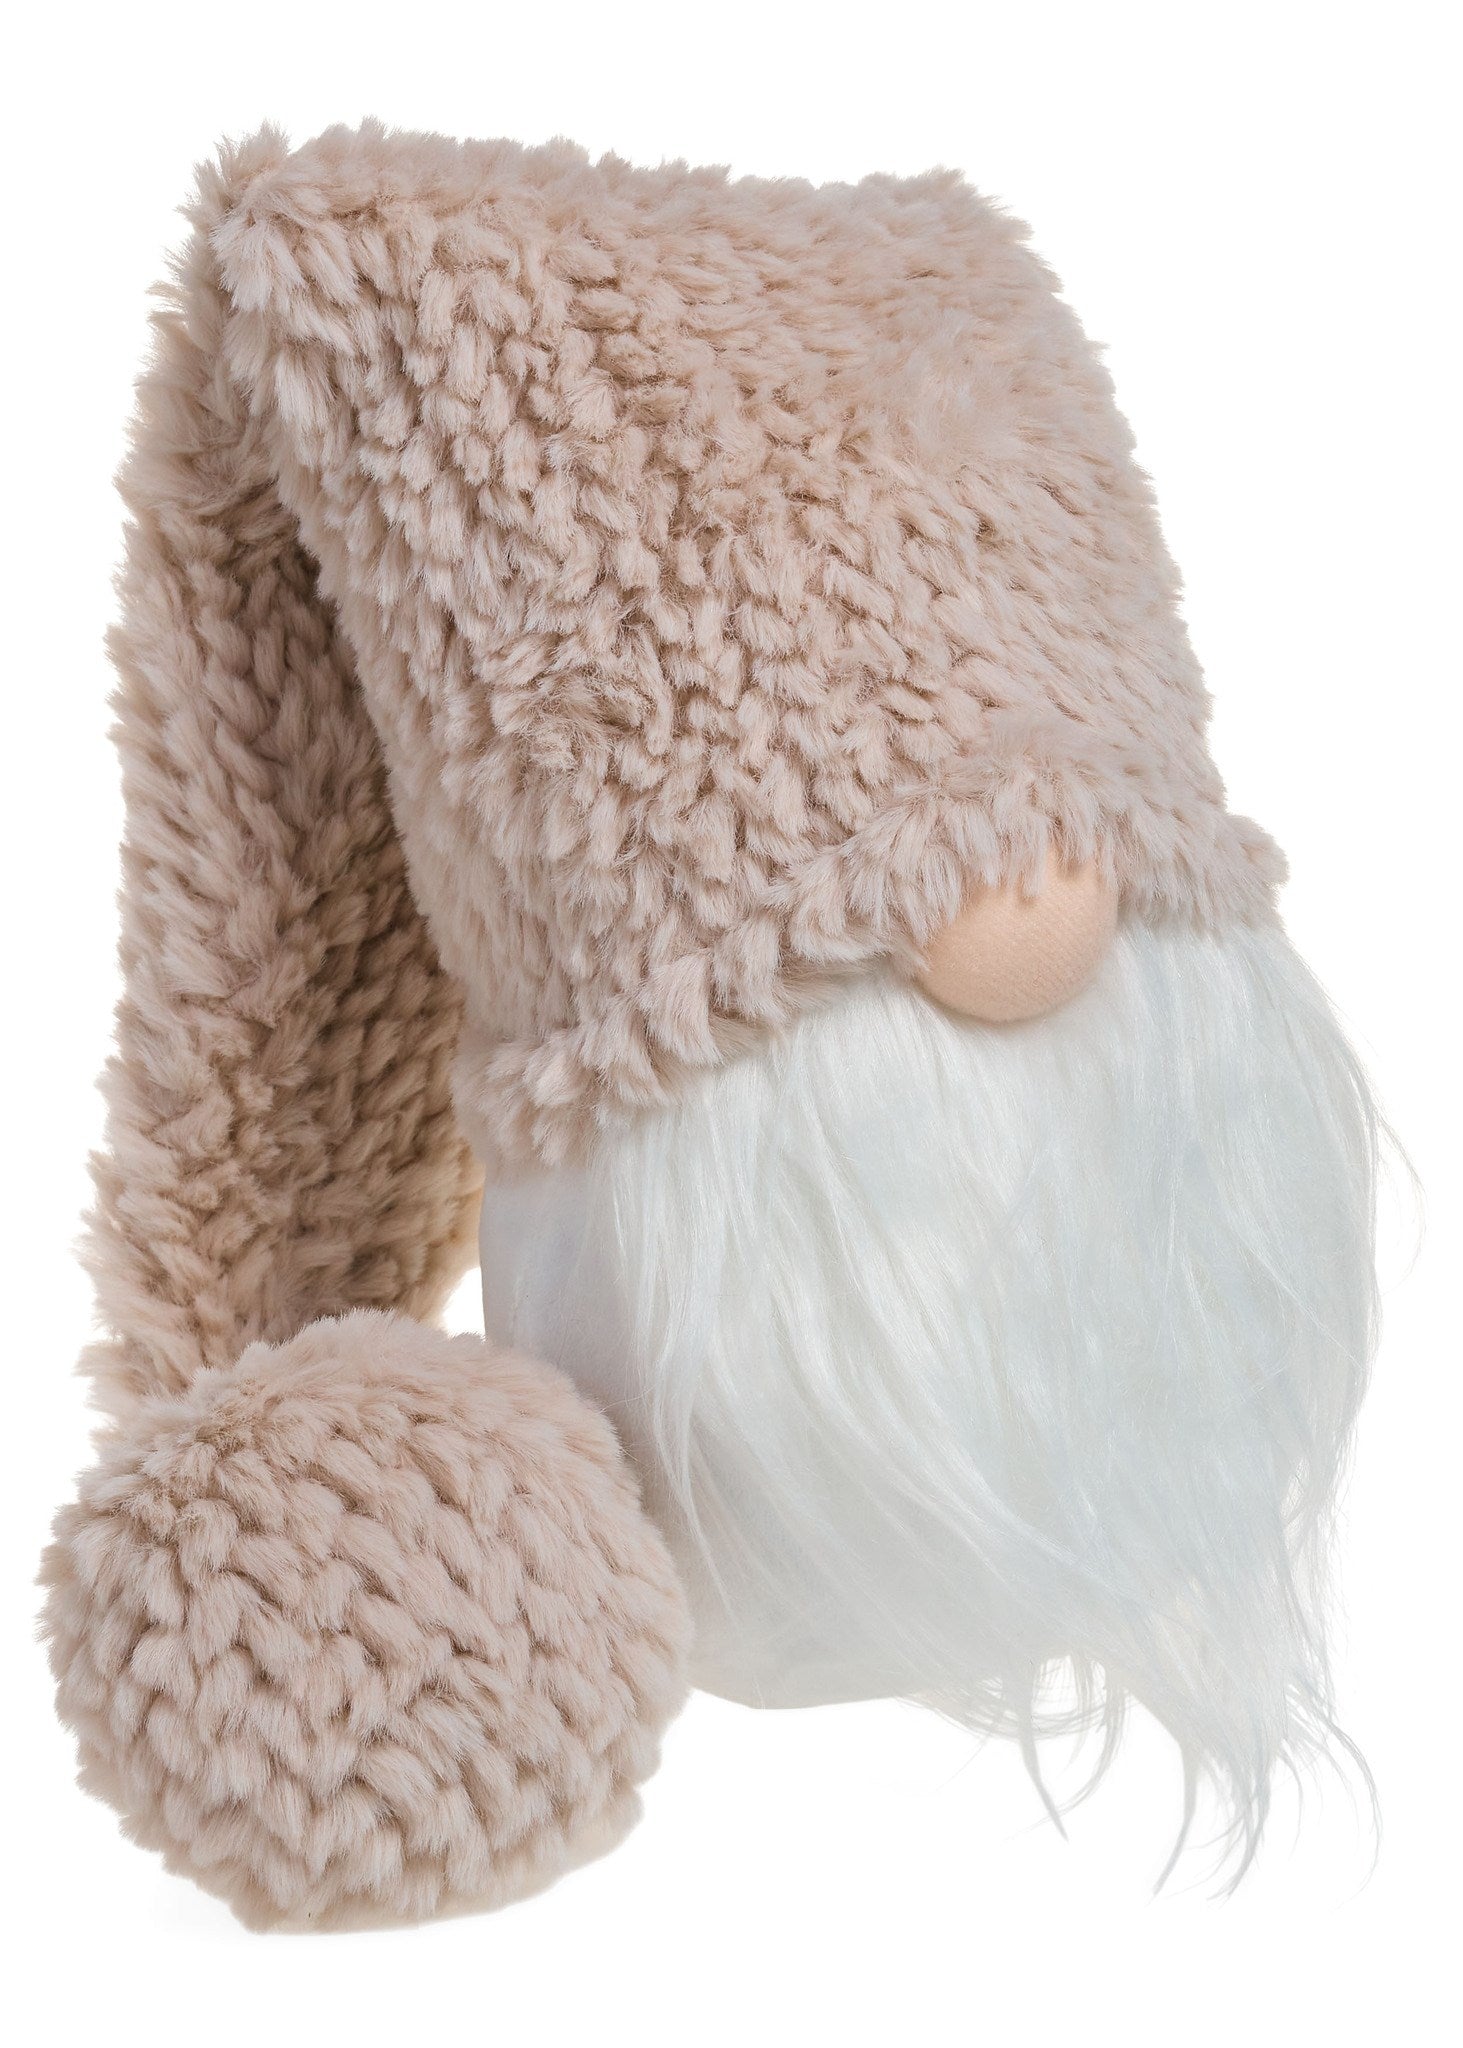 Gnome Head with Cream Knit Hat